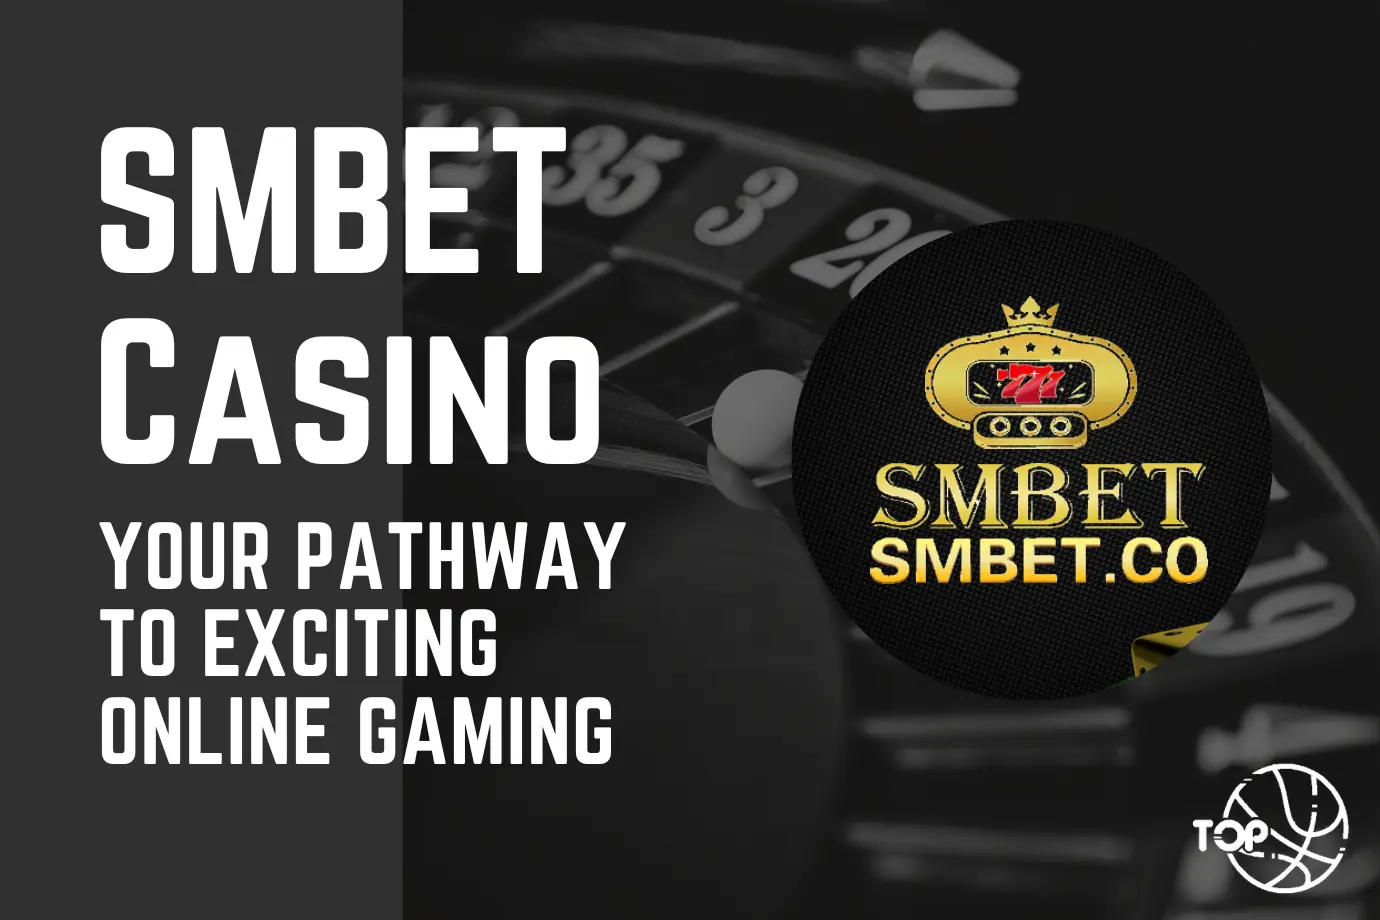 SMBET Casino: Your Pathway to Exciting Online Gaming